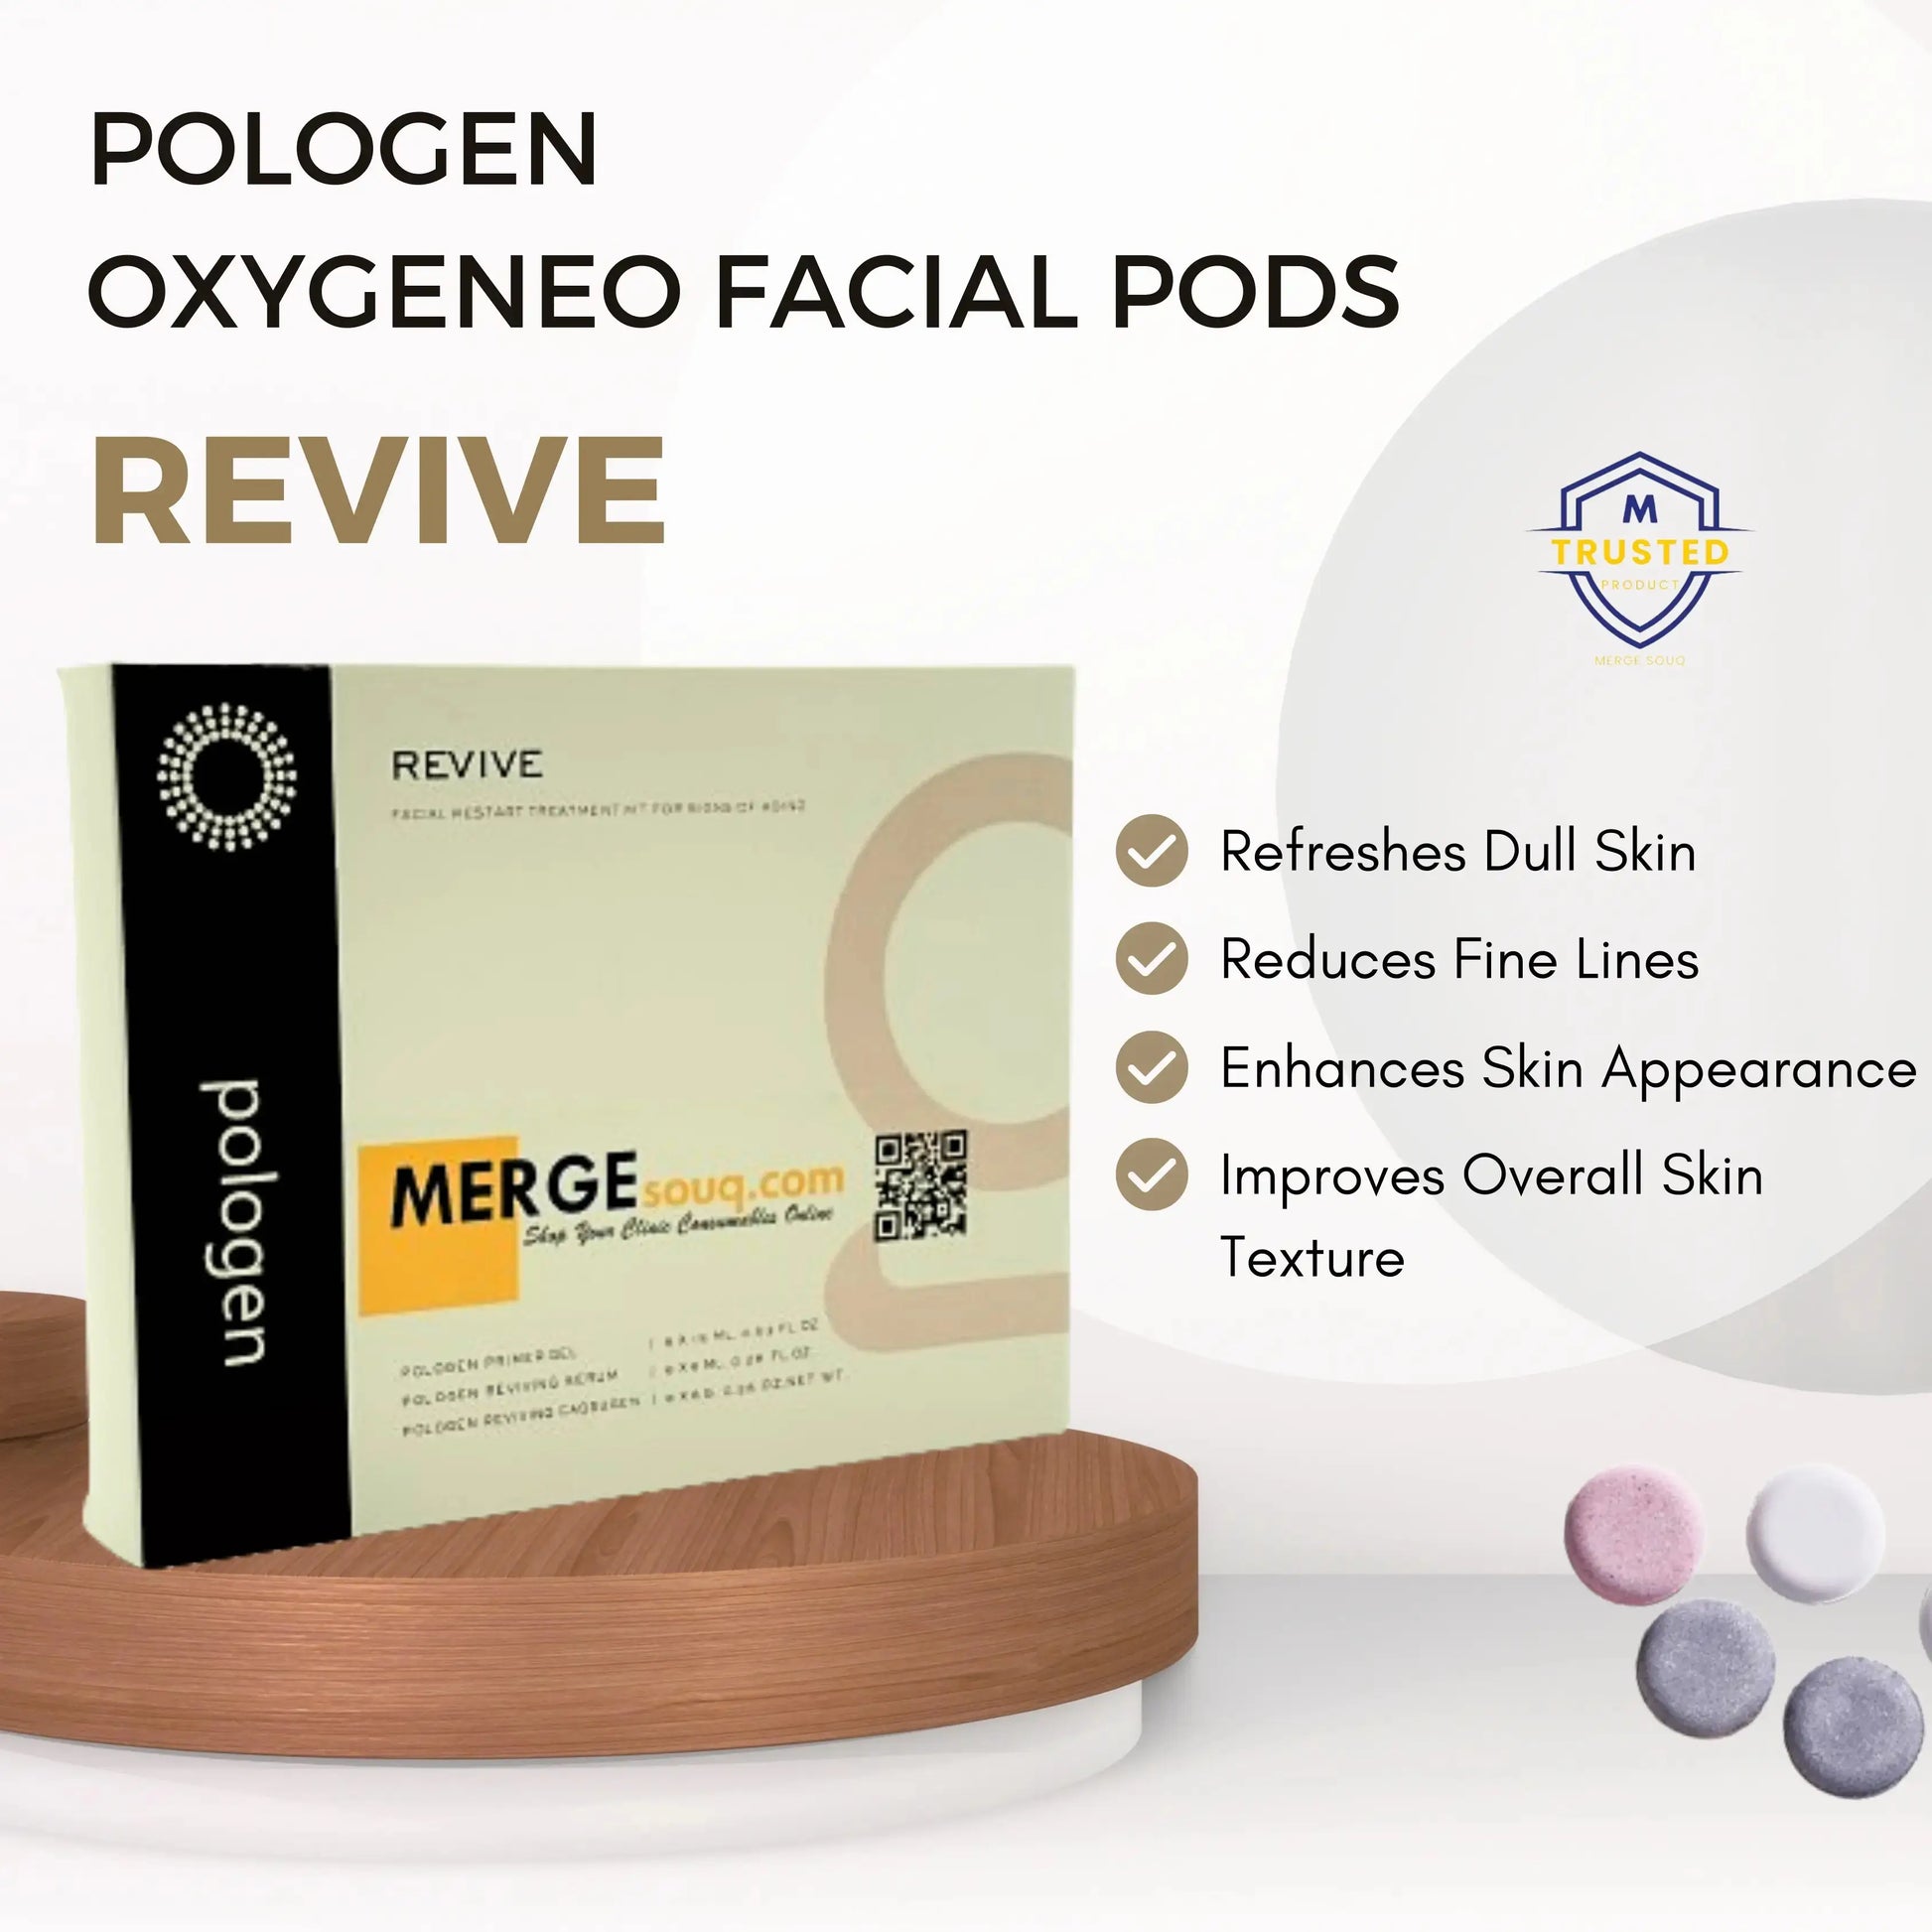 Pologen Geneo Revive| Refresh the skin| Facial Restart Treatment Kit for Signs of Aging| Oxygen Facial Machine Pods